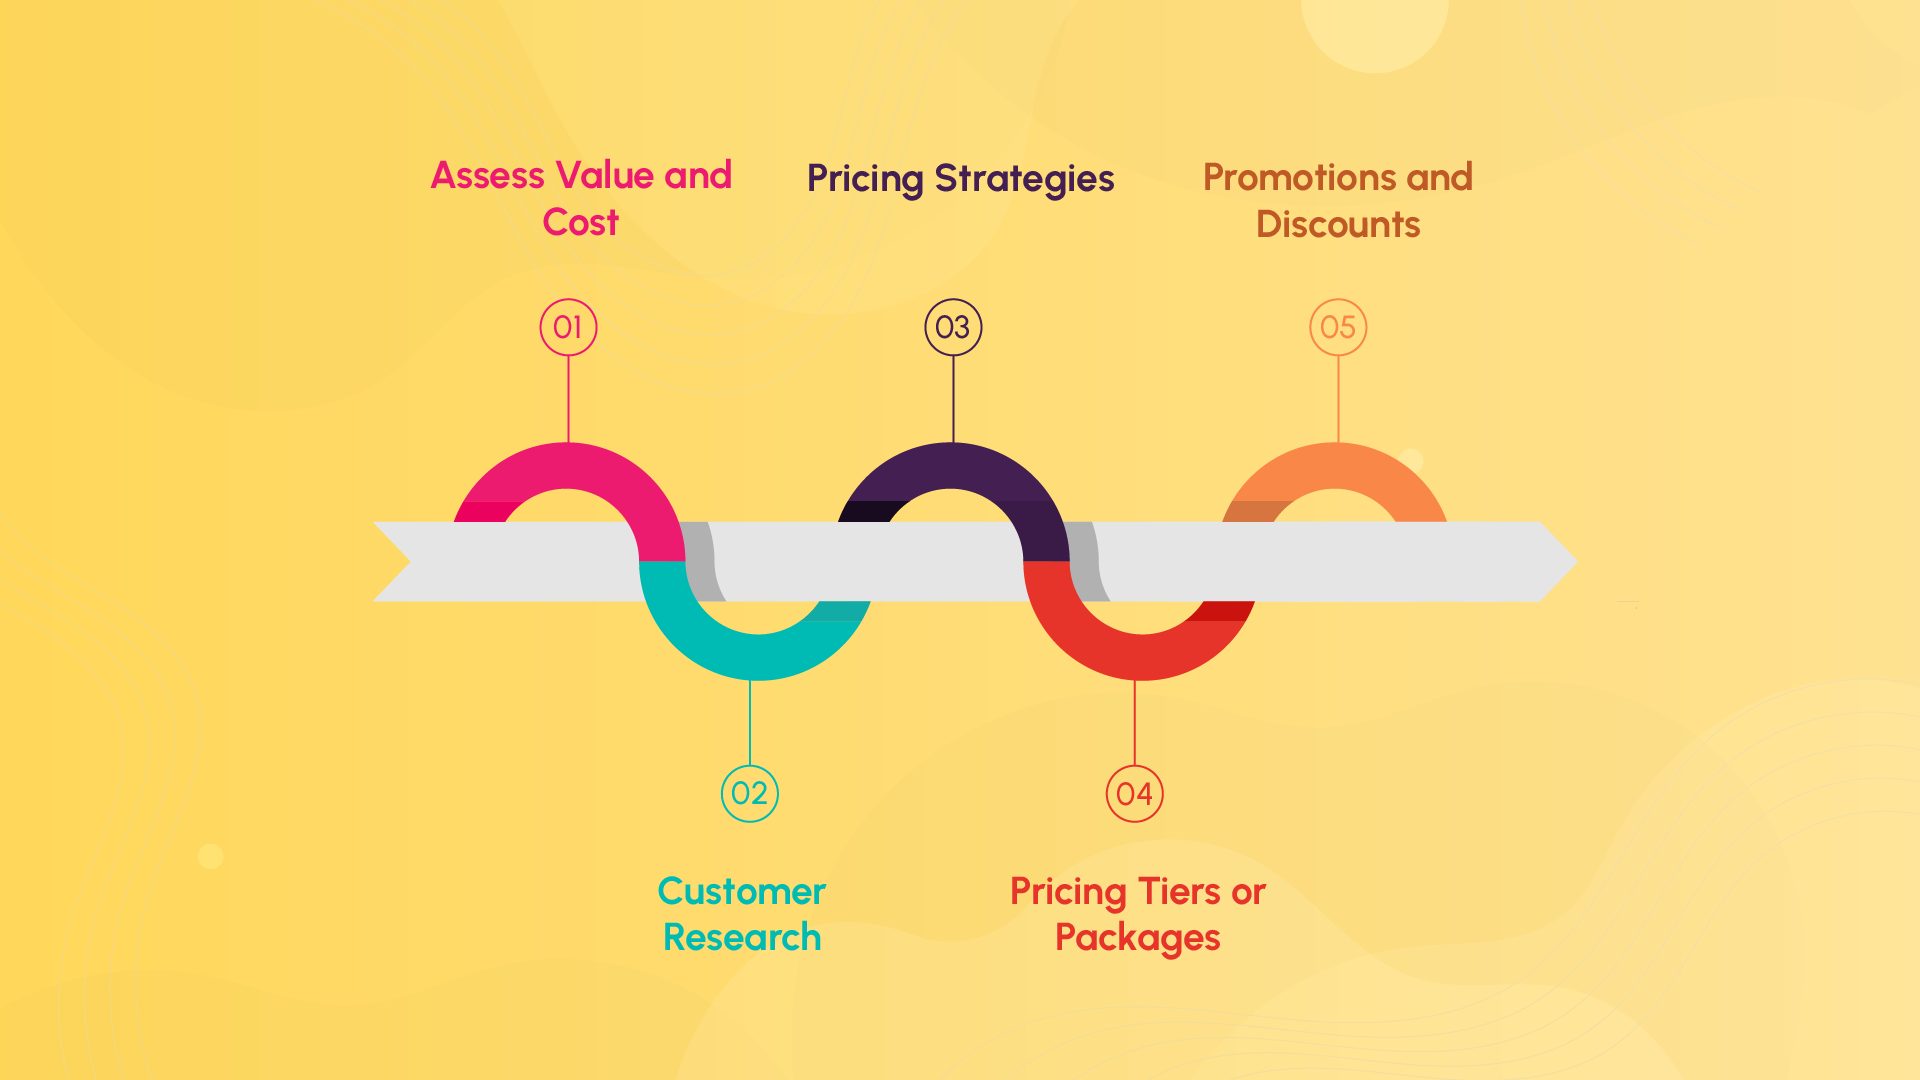 Step 7 - Determine the right pricing strategy